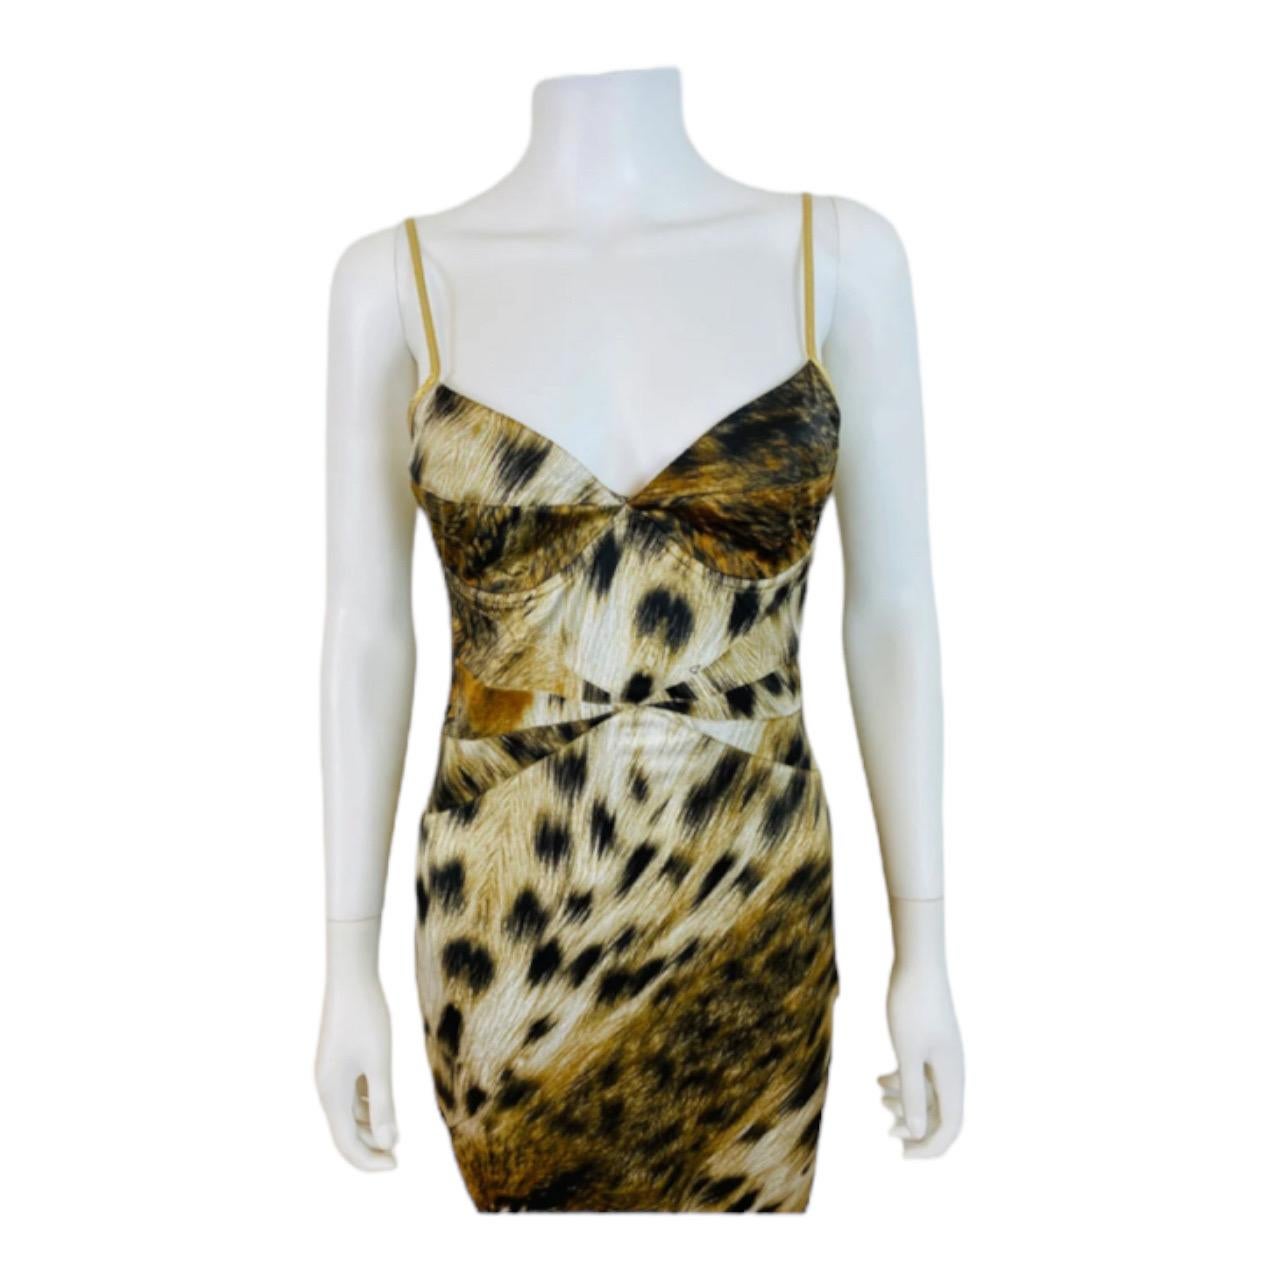 Vintage 2000s Just Cavalli Roberto Cavalli Cheetah Animal Print Maxi Dress Gown In Excellent Condition For Sale In Denver, CO